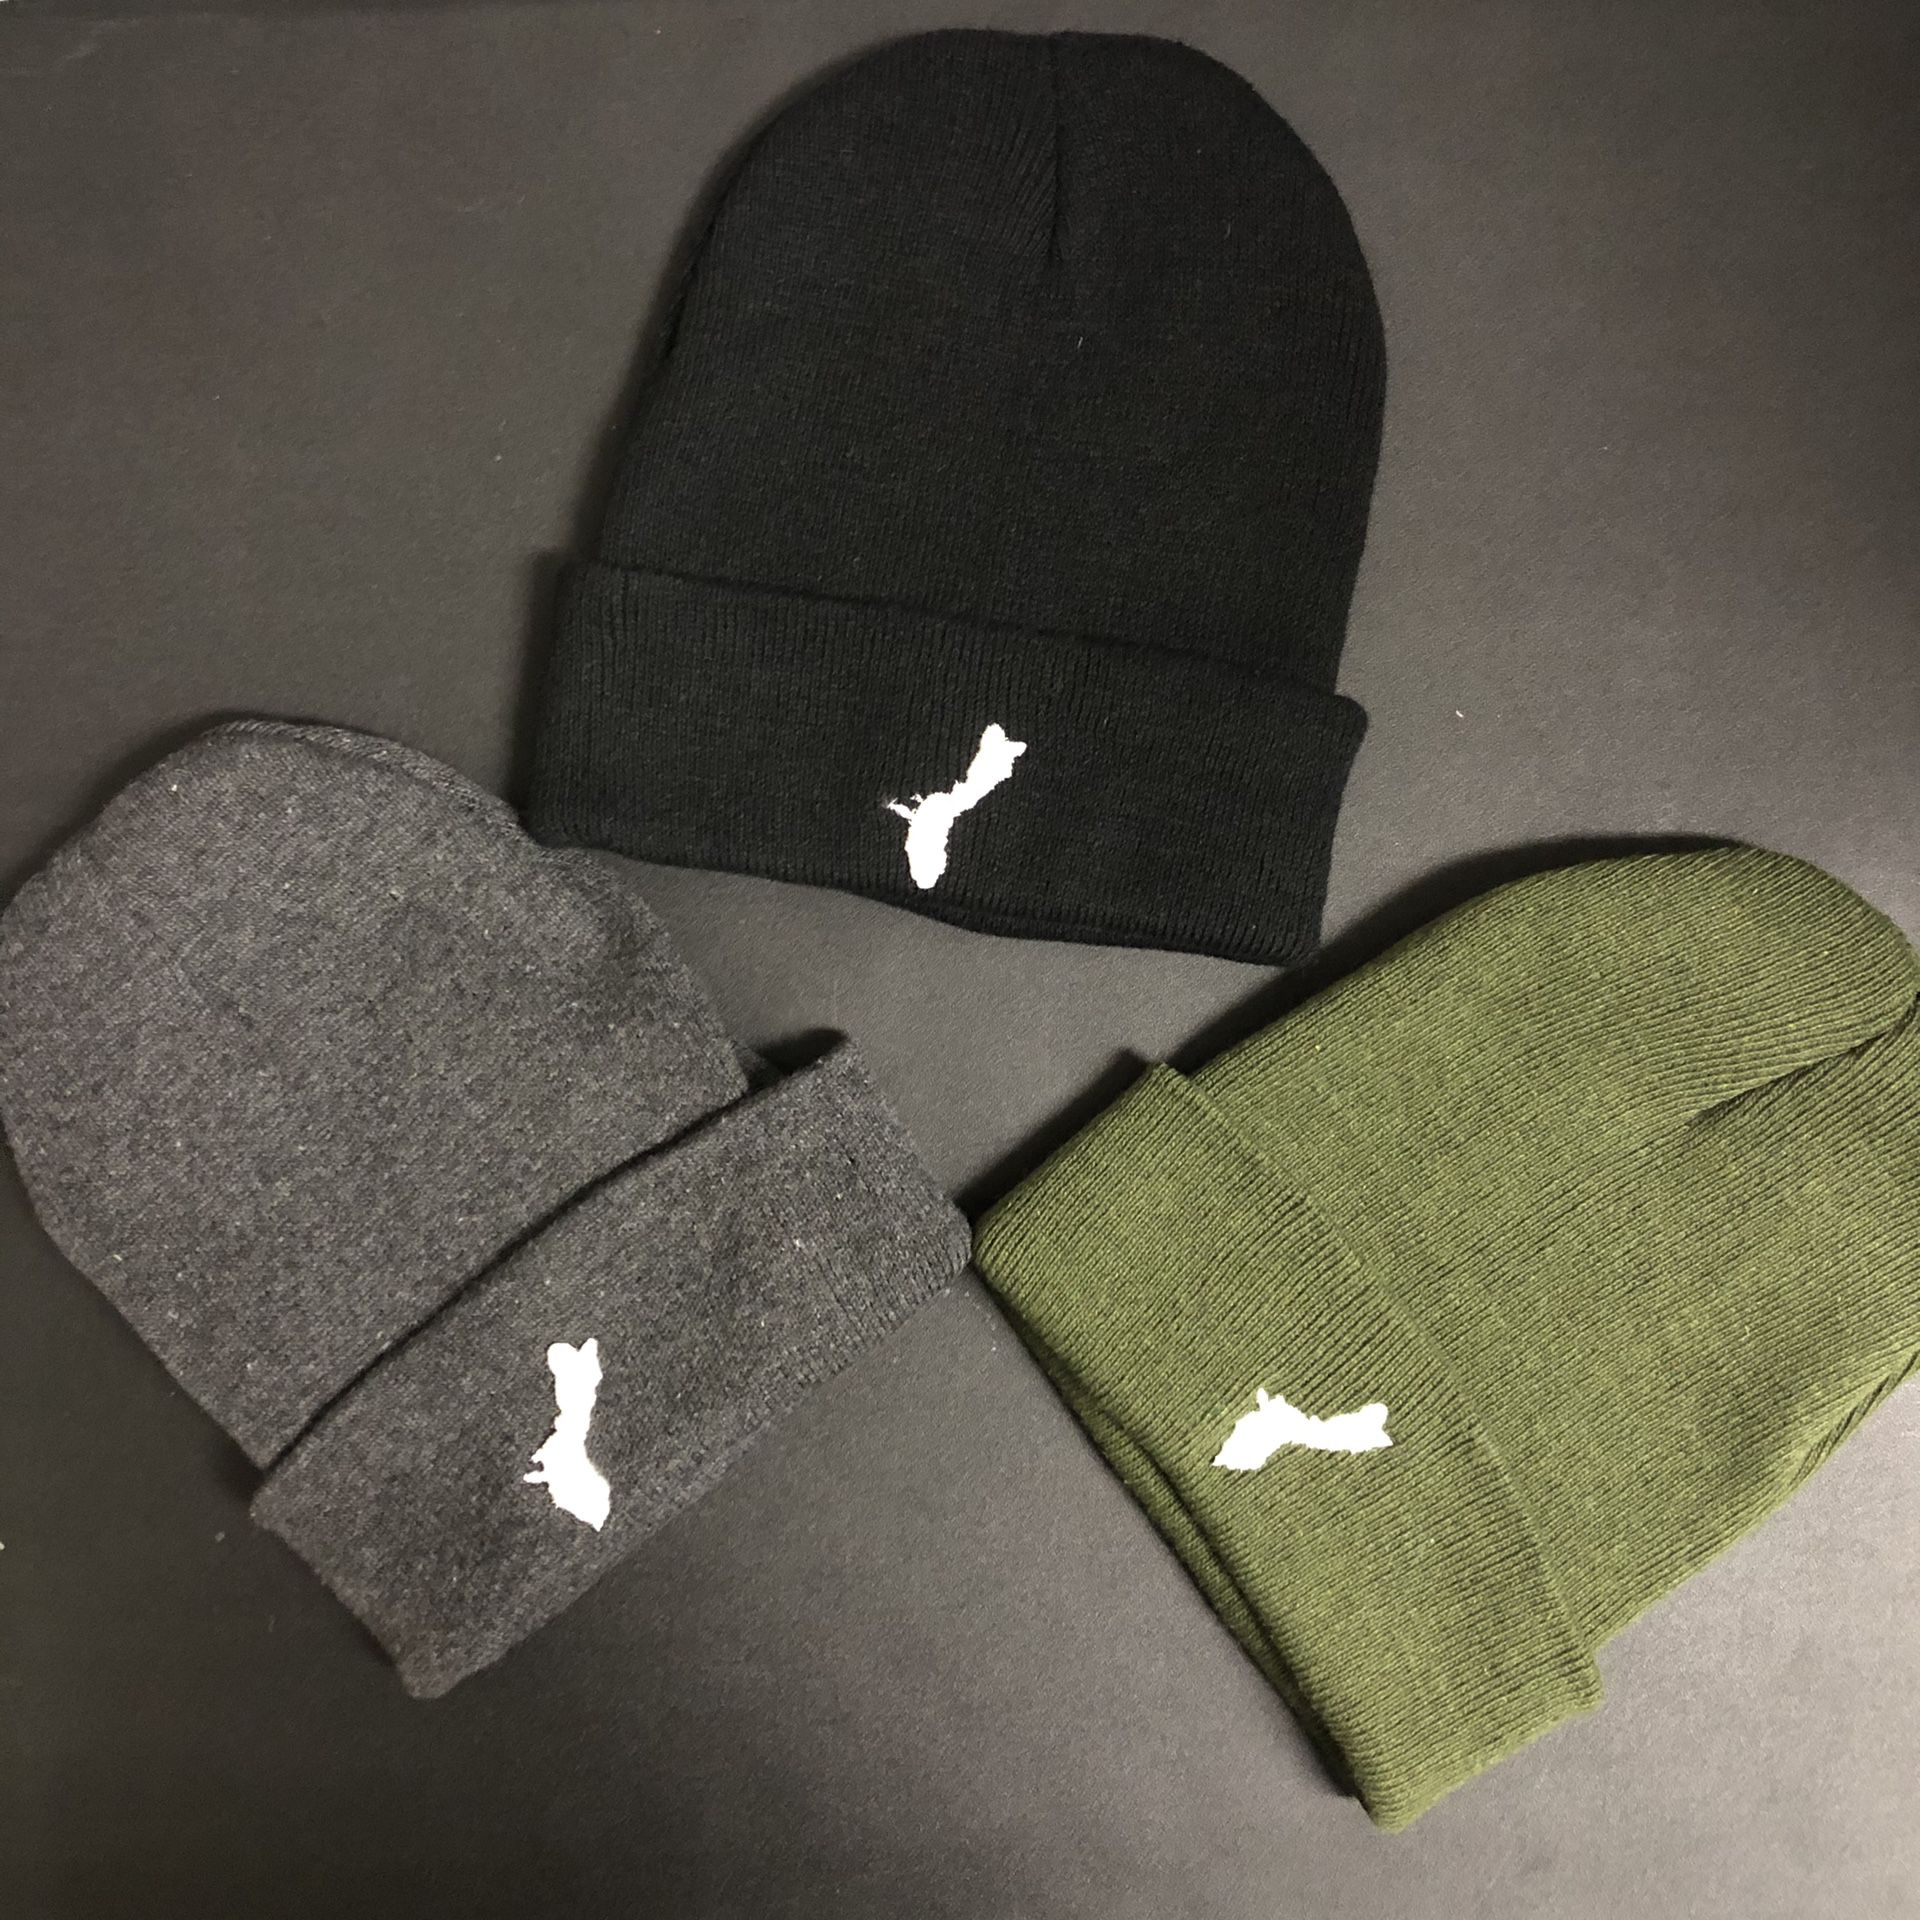 12 Cuff or Pom Beanies Beanies custom embroidered with your logo/artwork custom